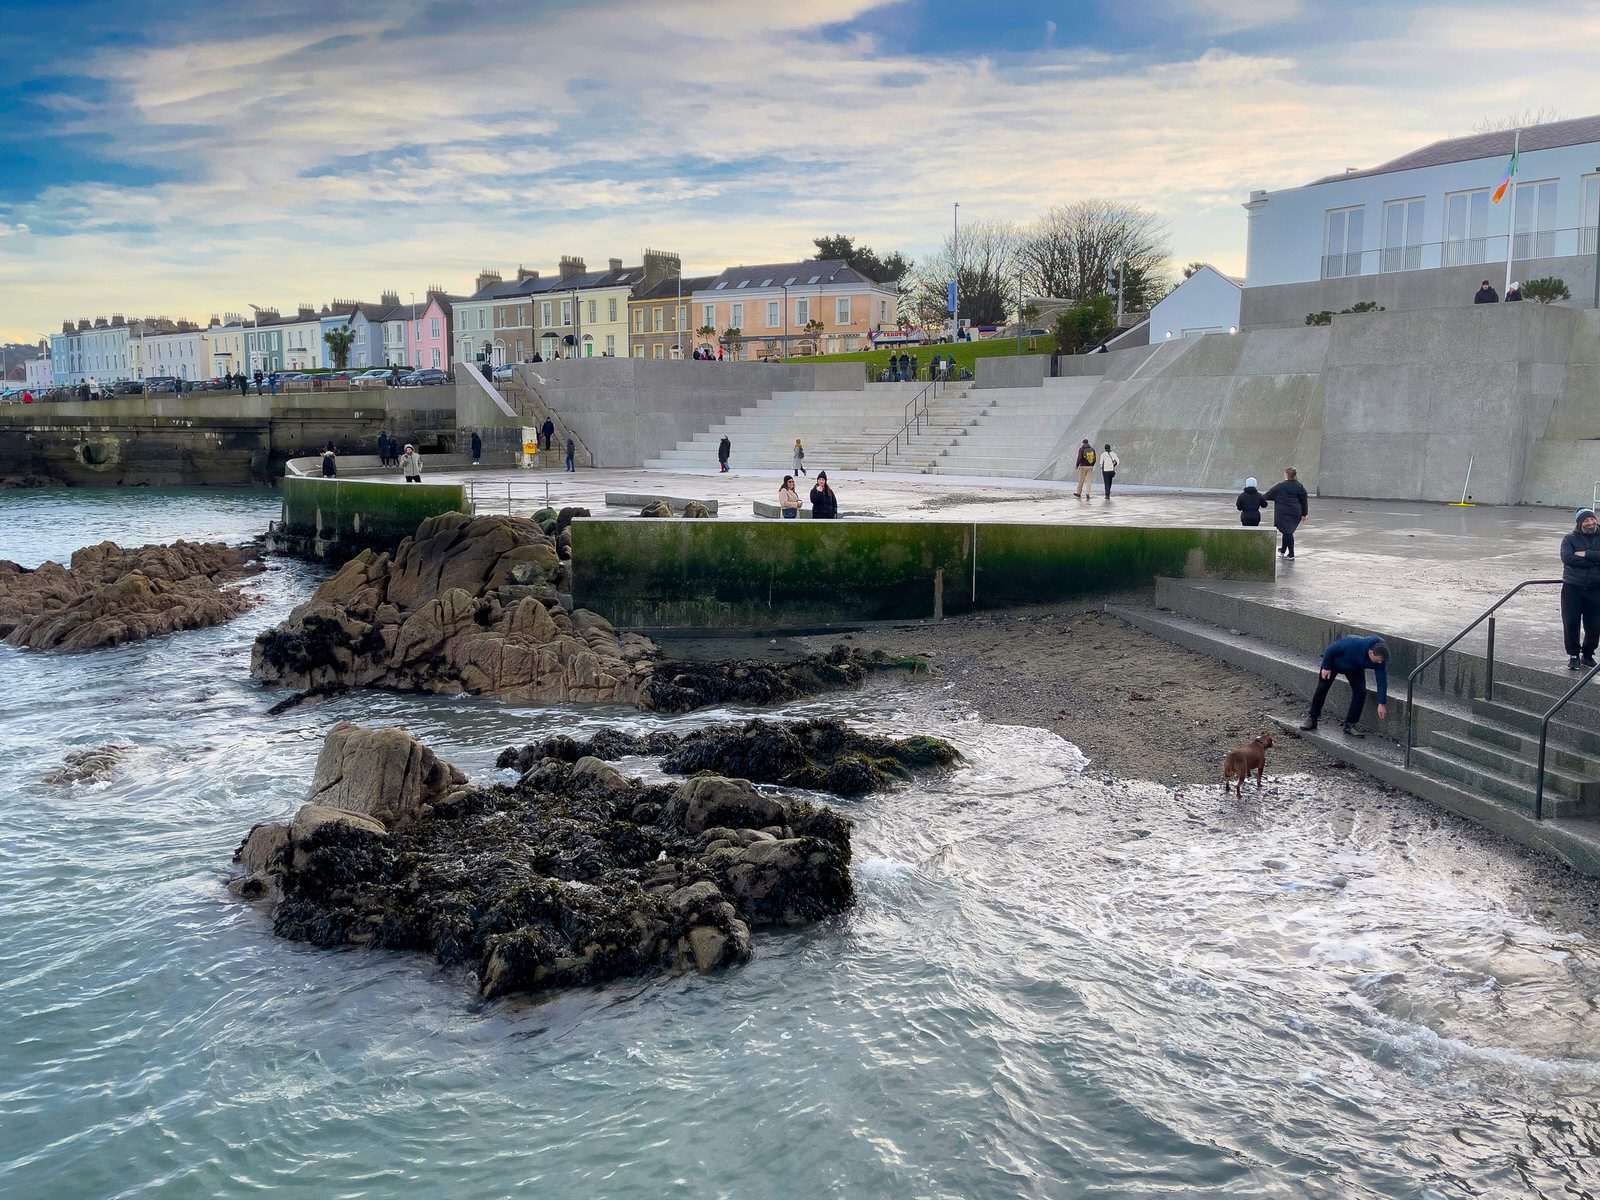 THE REFURBISHED BATHS IN DUN LAOGHAIRE BUT WHERE IS THE POOL 042